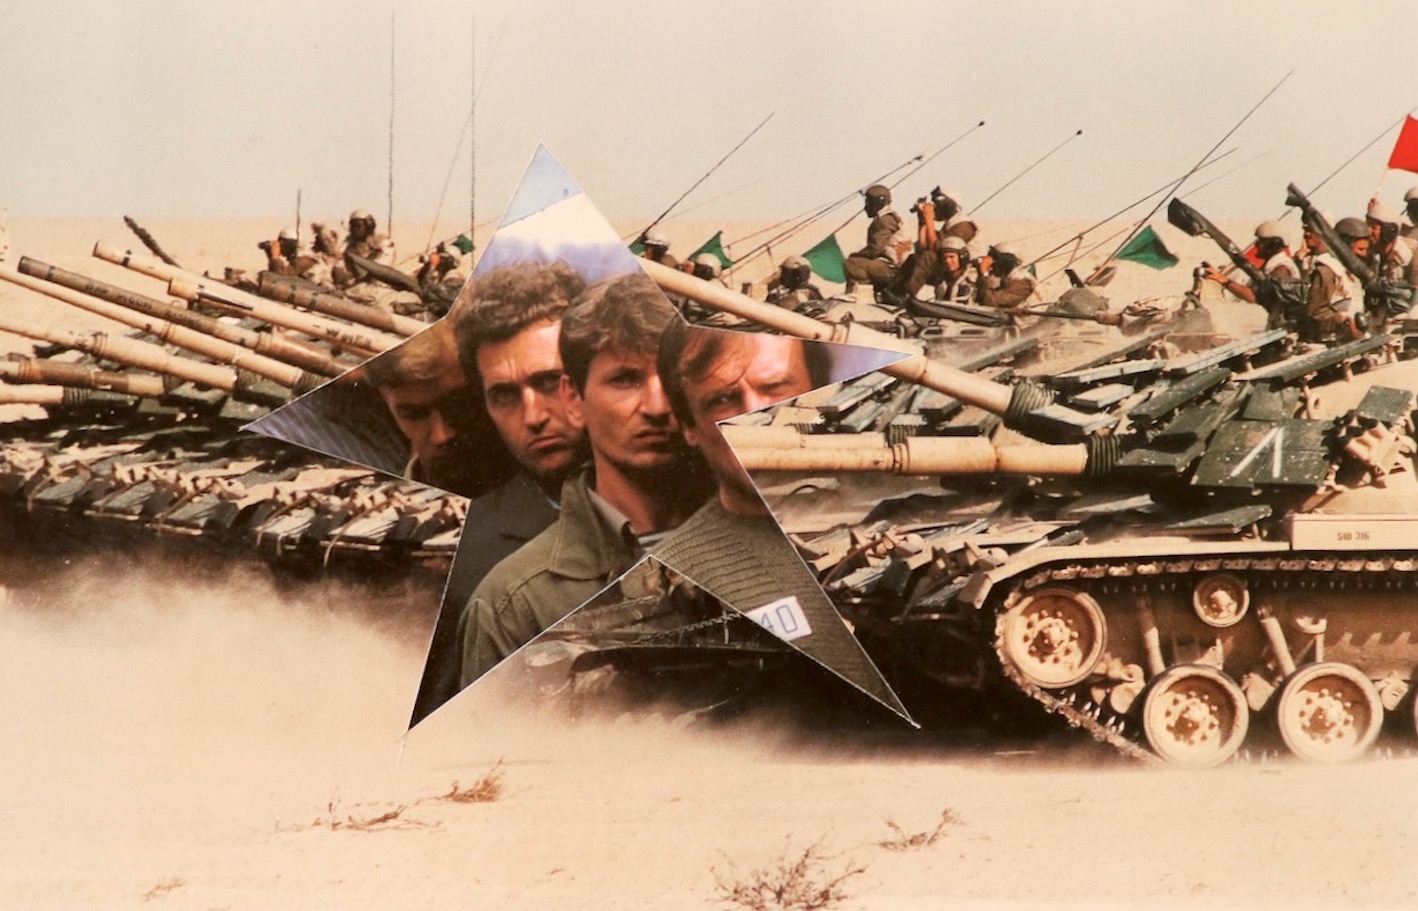 tanks move from right to left of a desert expanse, four men carrying their comrade in a coffin emerge from a jagged star cut at the centre of the image